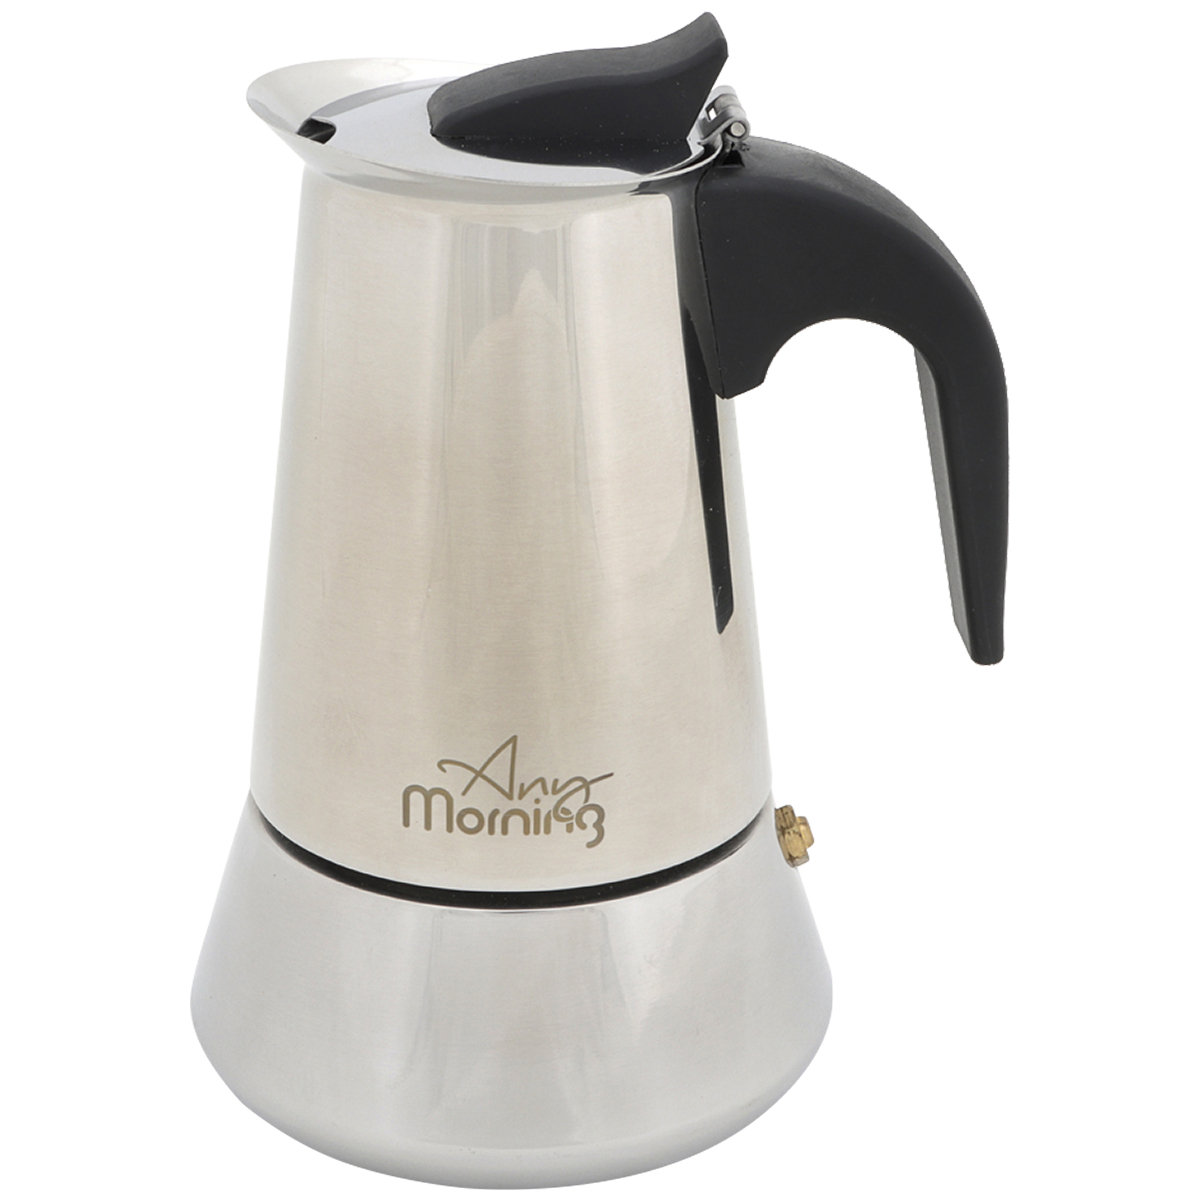 Any morning jun-6 stainless steel espresso coffee maker 300 ml